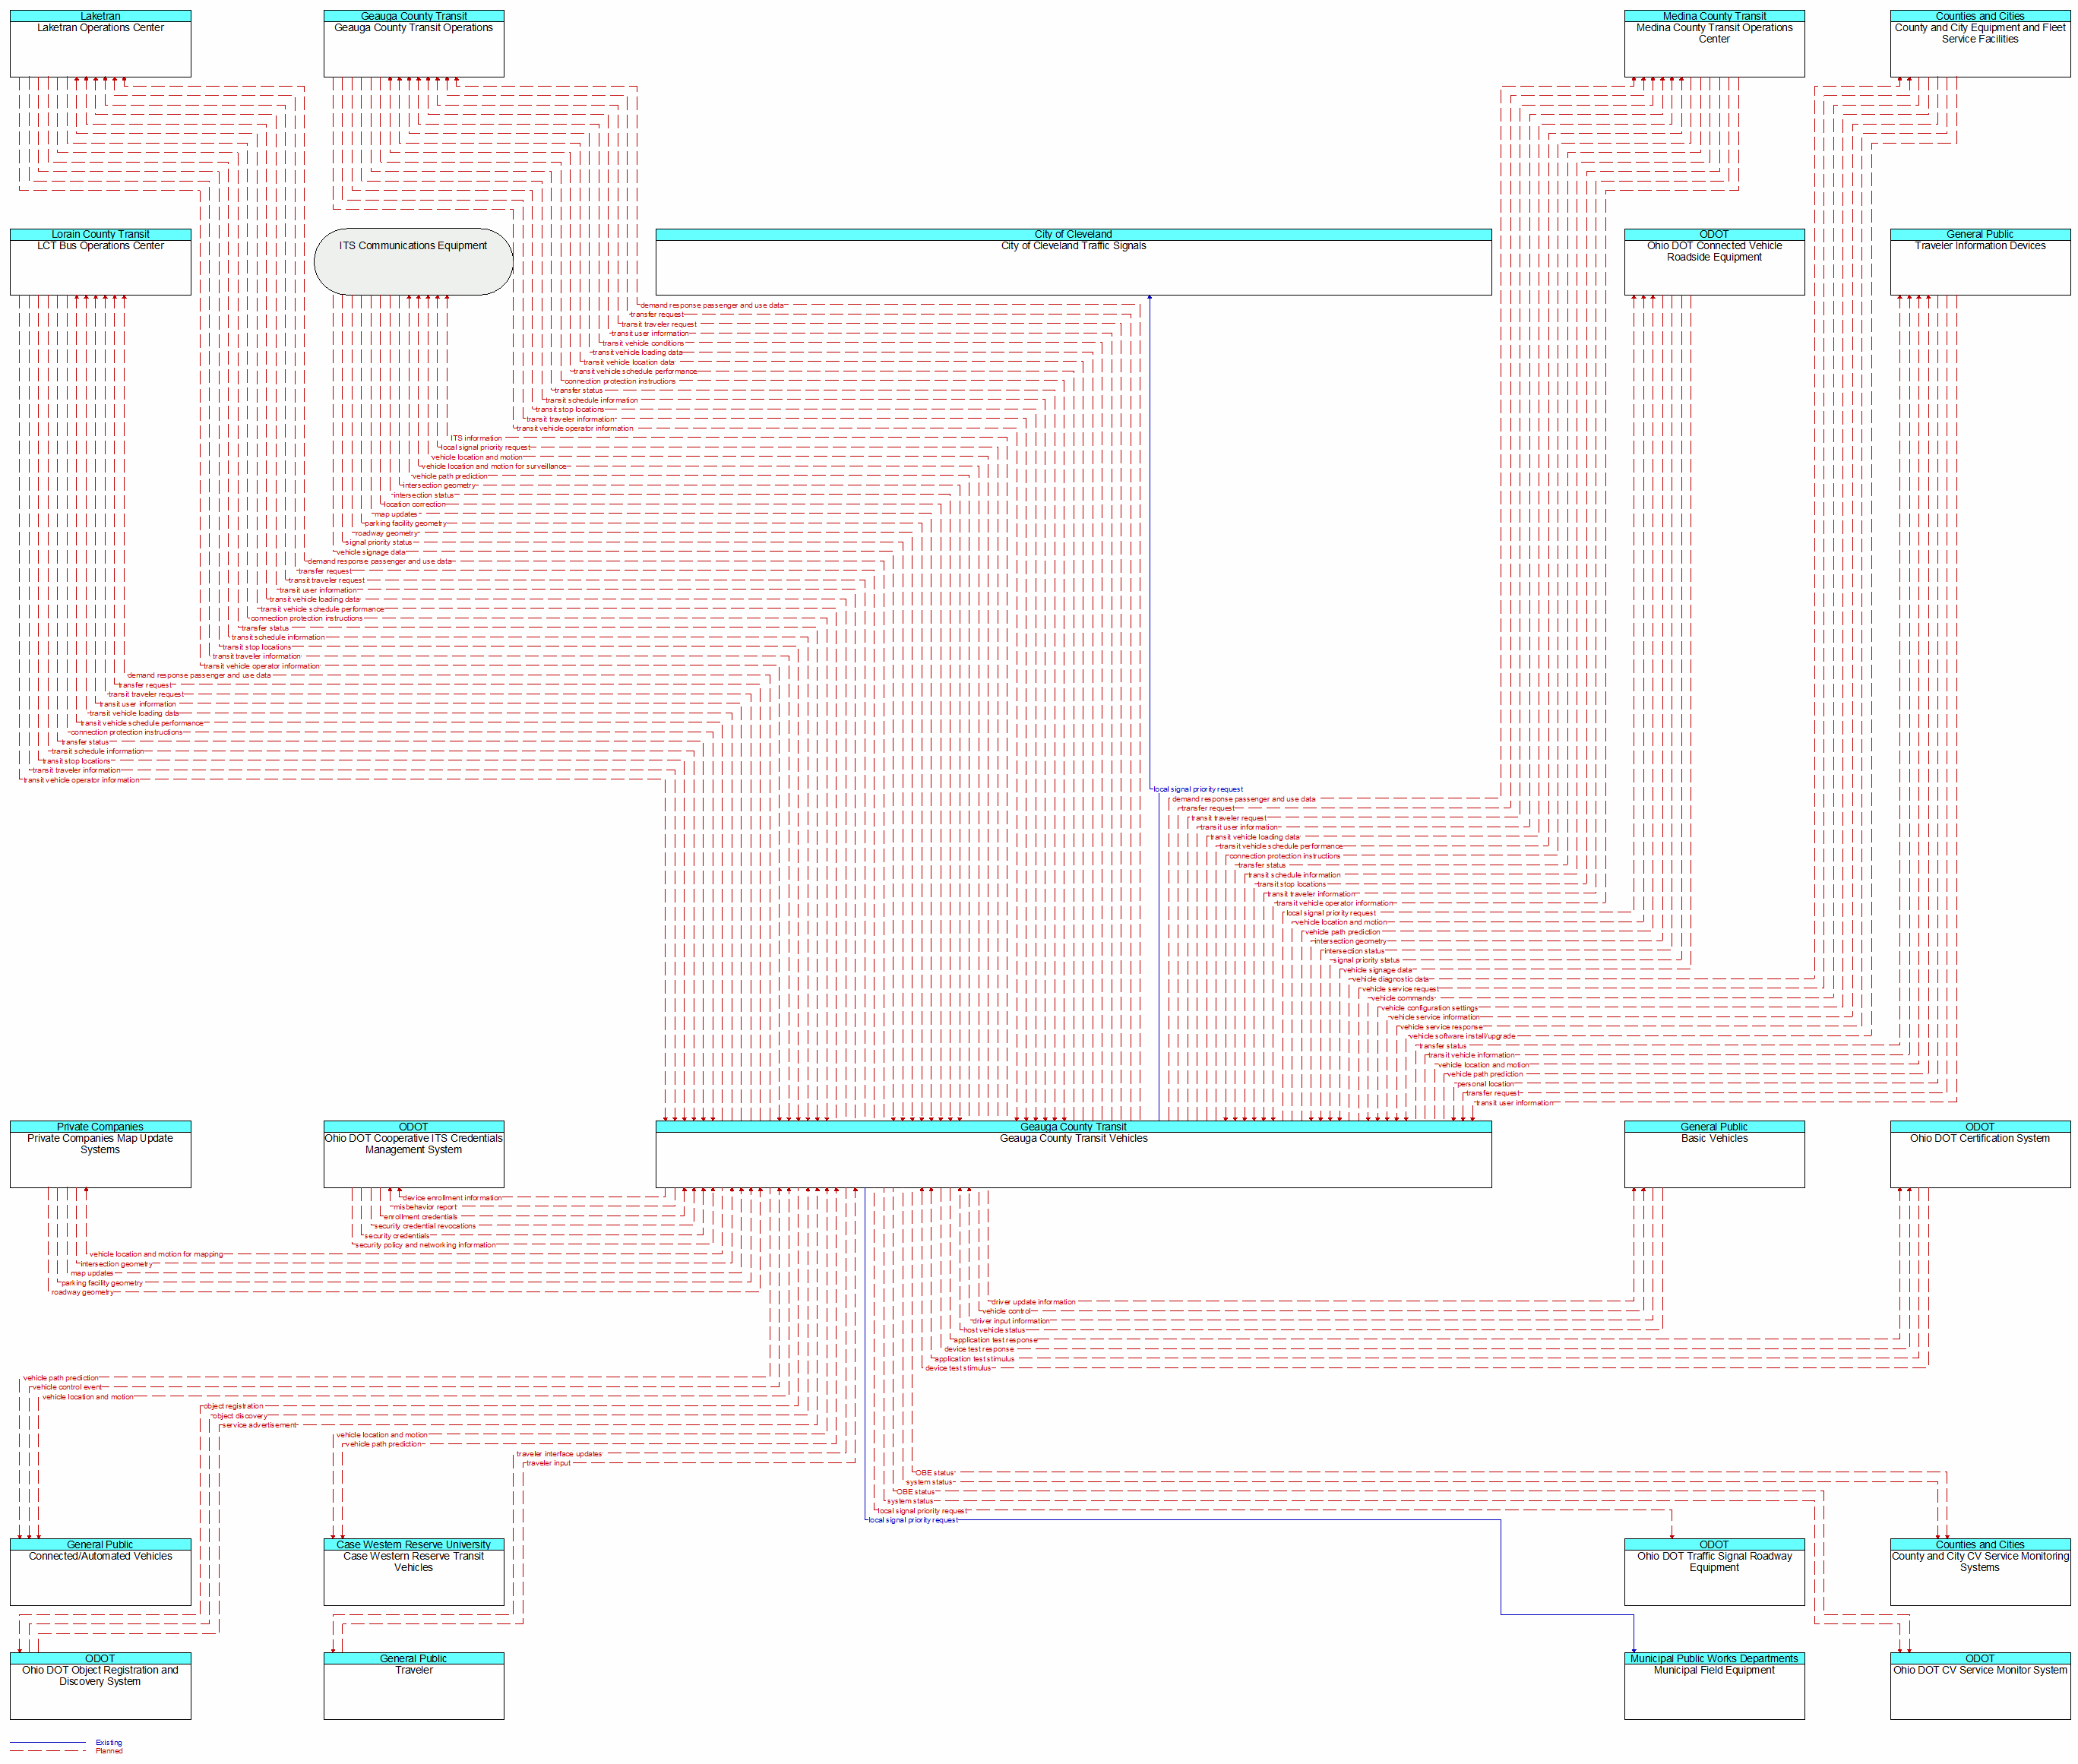 Context Diagram - Geauga County Transit Vehicles